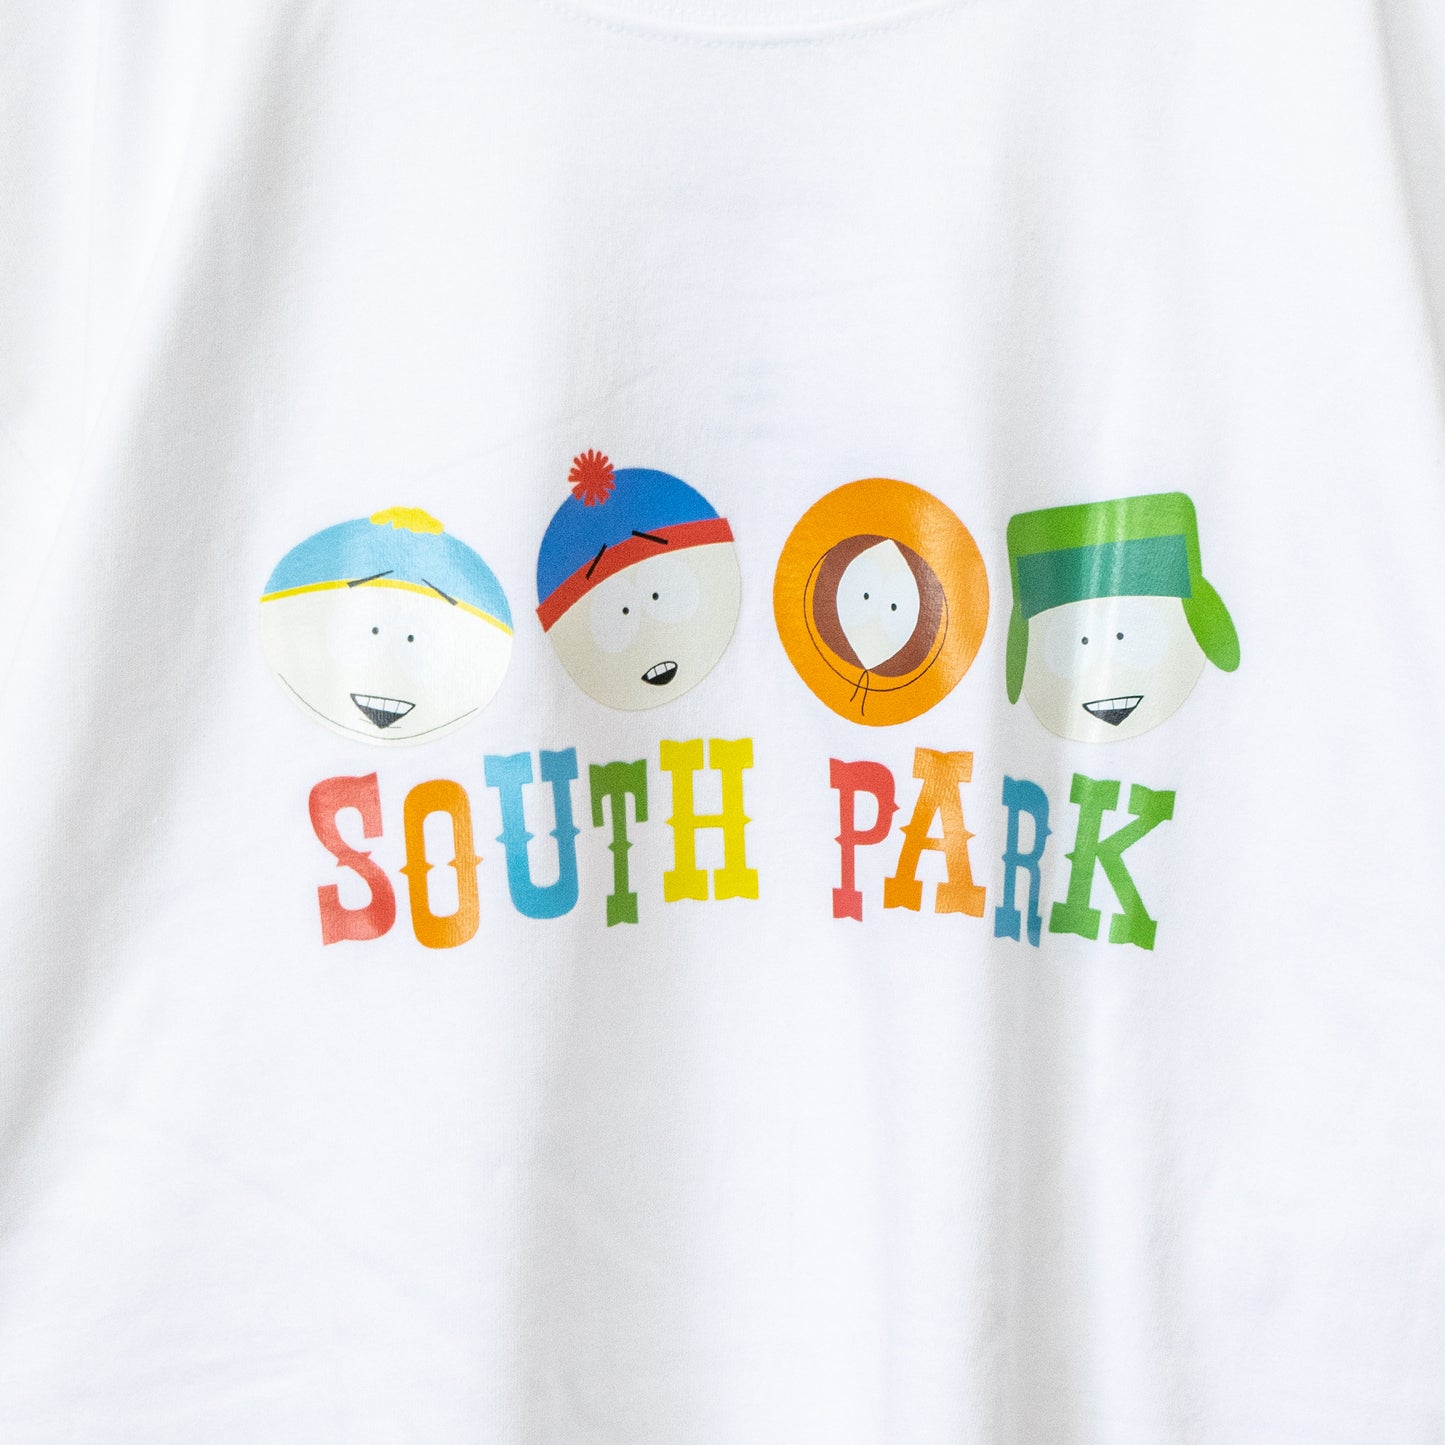 SOUTH PARK B S/S T-shirt (2 color) - YOUAREMYPOISON